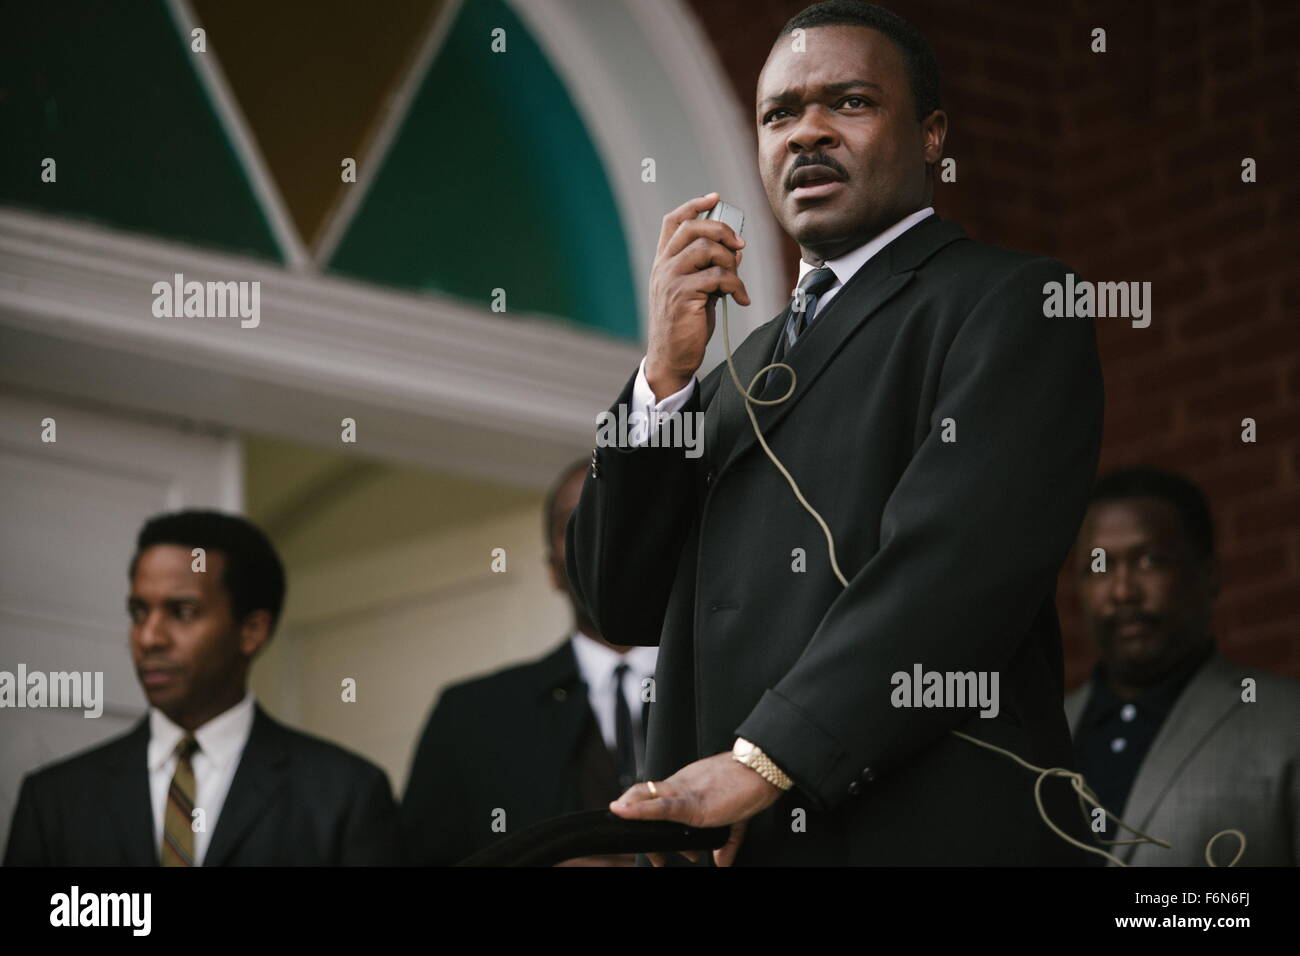 RELEASE DATE: January 9, 2015 TITLE: Selma STUDIO: Paramount Pictures DIRECTOR: Ava DuVernay PLOT: Martin Luther King and the civil rights marches of Selma, Alabama, that changed the United States for ever. PICTURED: DAVID OYEOWO as Martin Luther King Jr Stock Photo